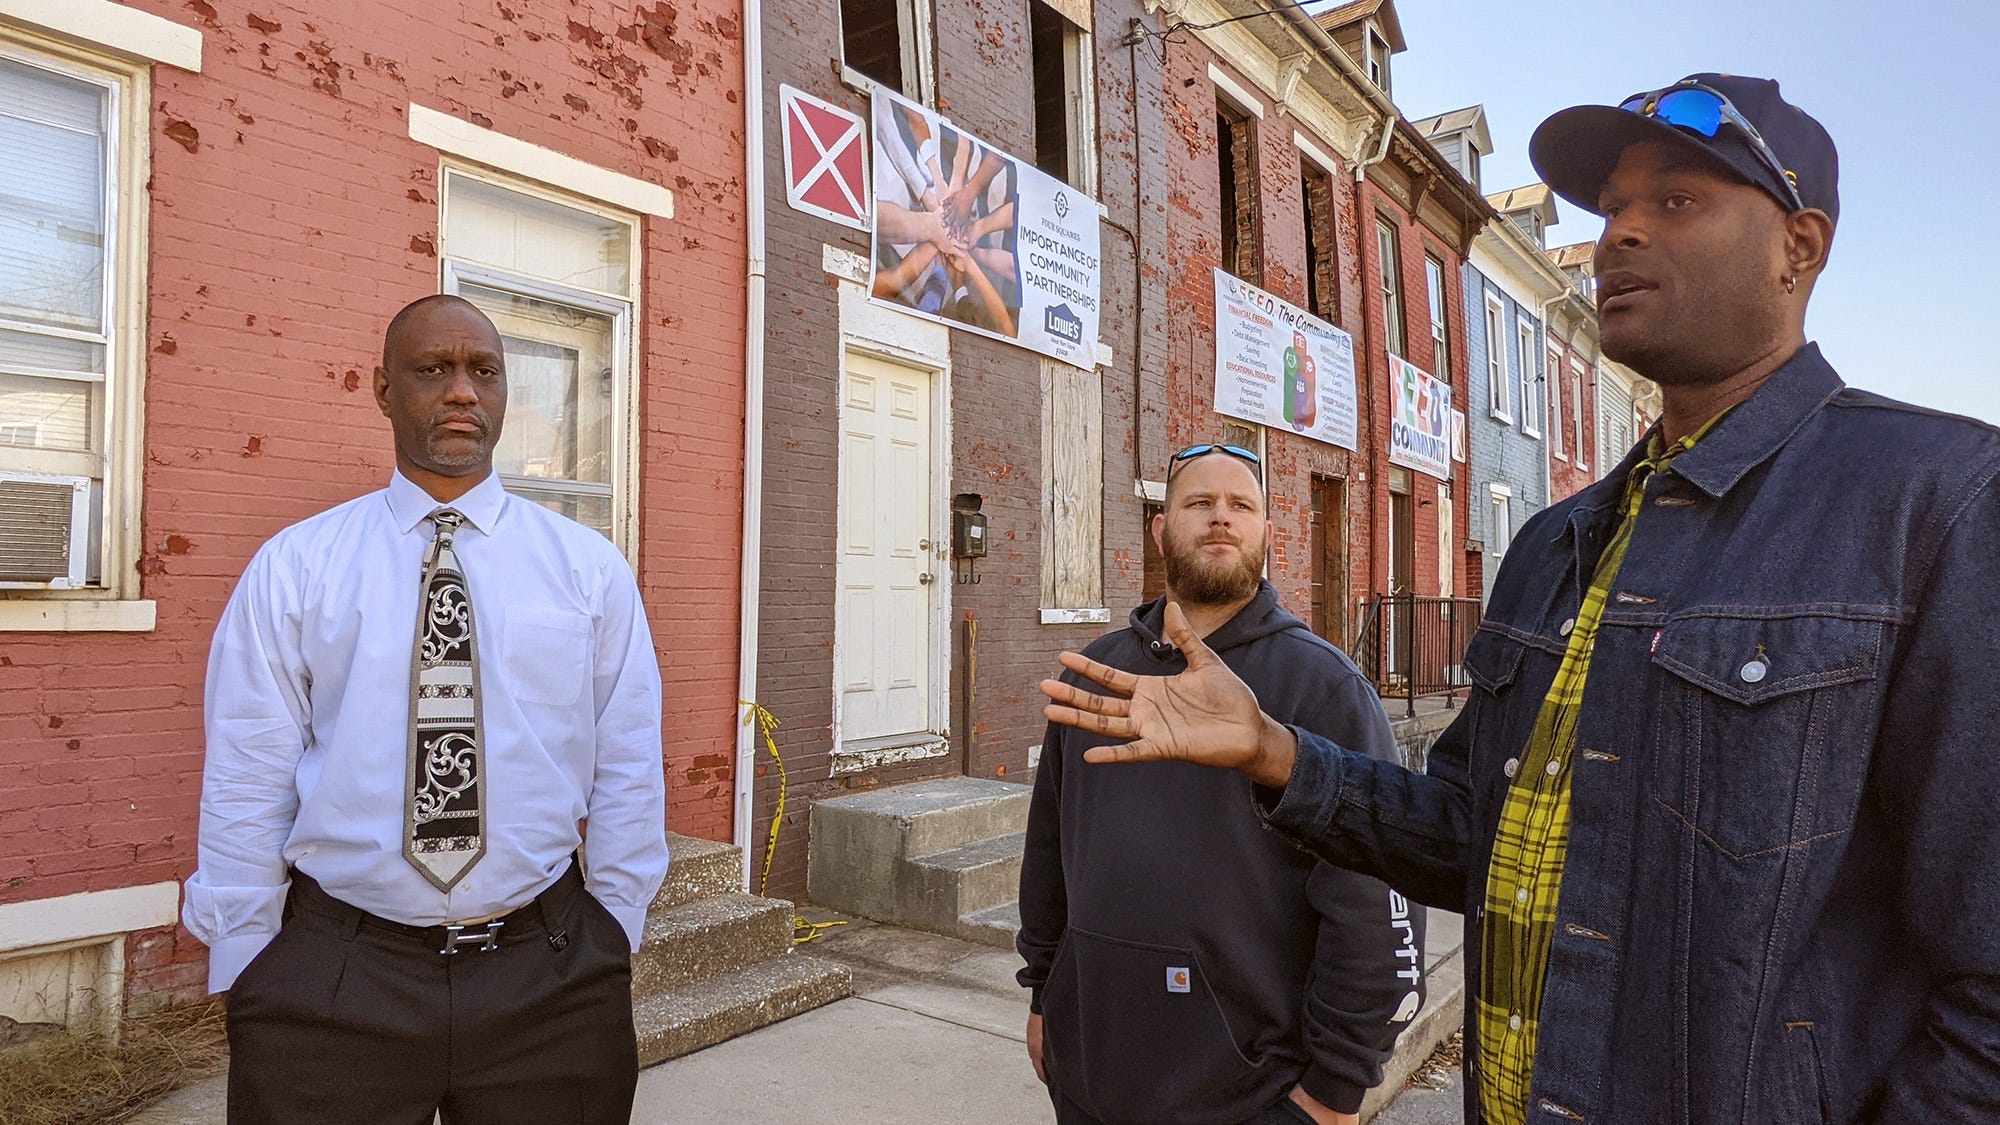 Fred Walker, left, and Anthony Moore, right, talk about plans for Tamra Langle's Salem Square home in front of the facade on Nov. 11, 2021. Cody Lighty, vice president of Four Square Construction, looks on at center. The facade, which was pulling away from the building, was later removed and will be rebuilt.